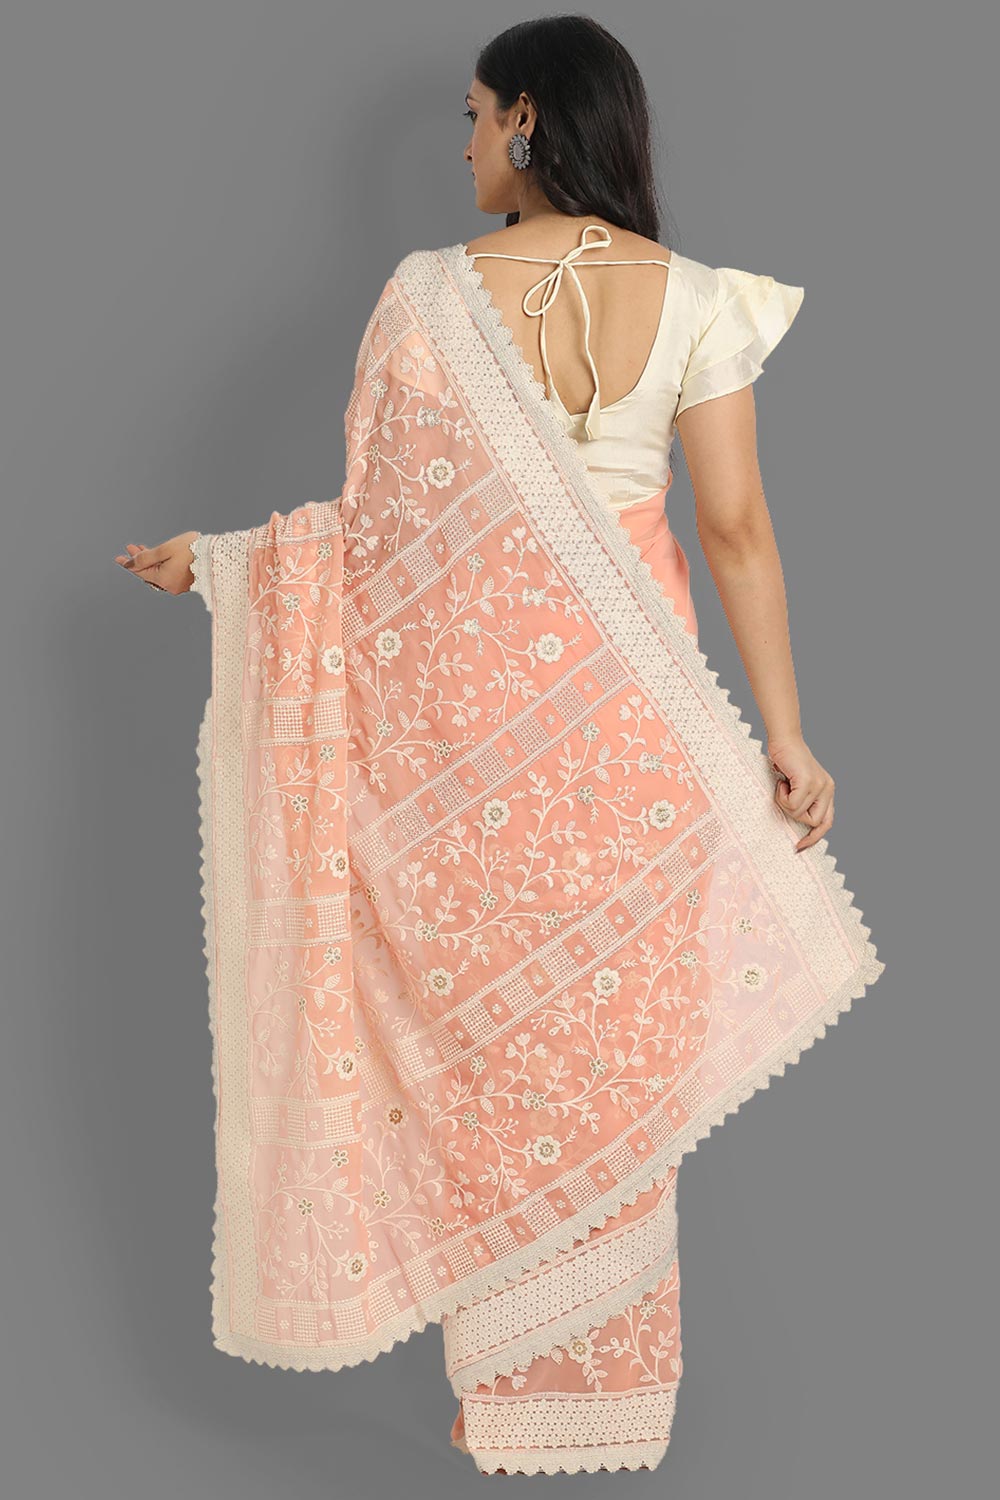 Shop Lata Peach Faux Georgette Embroidered One Minute Saree at best offer at our  Store - One Minute Saree